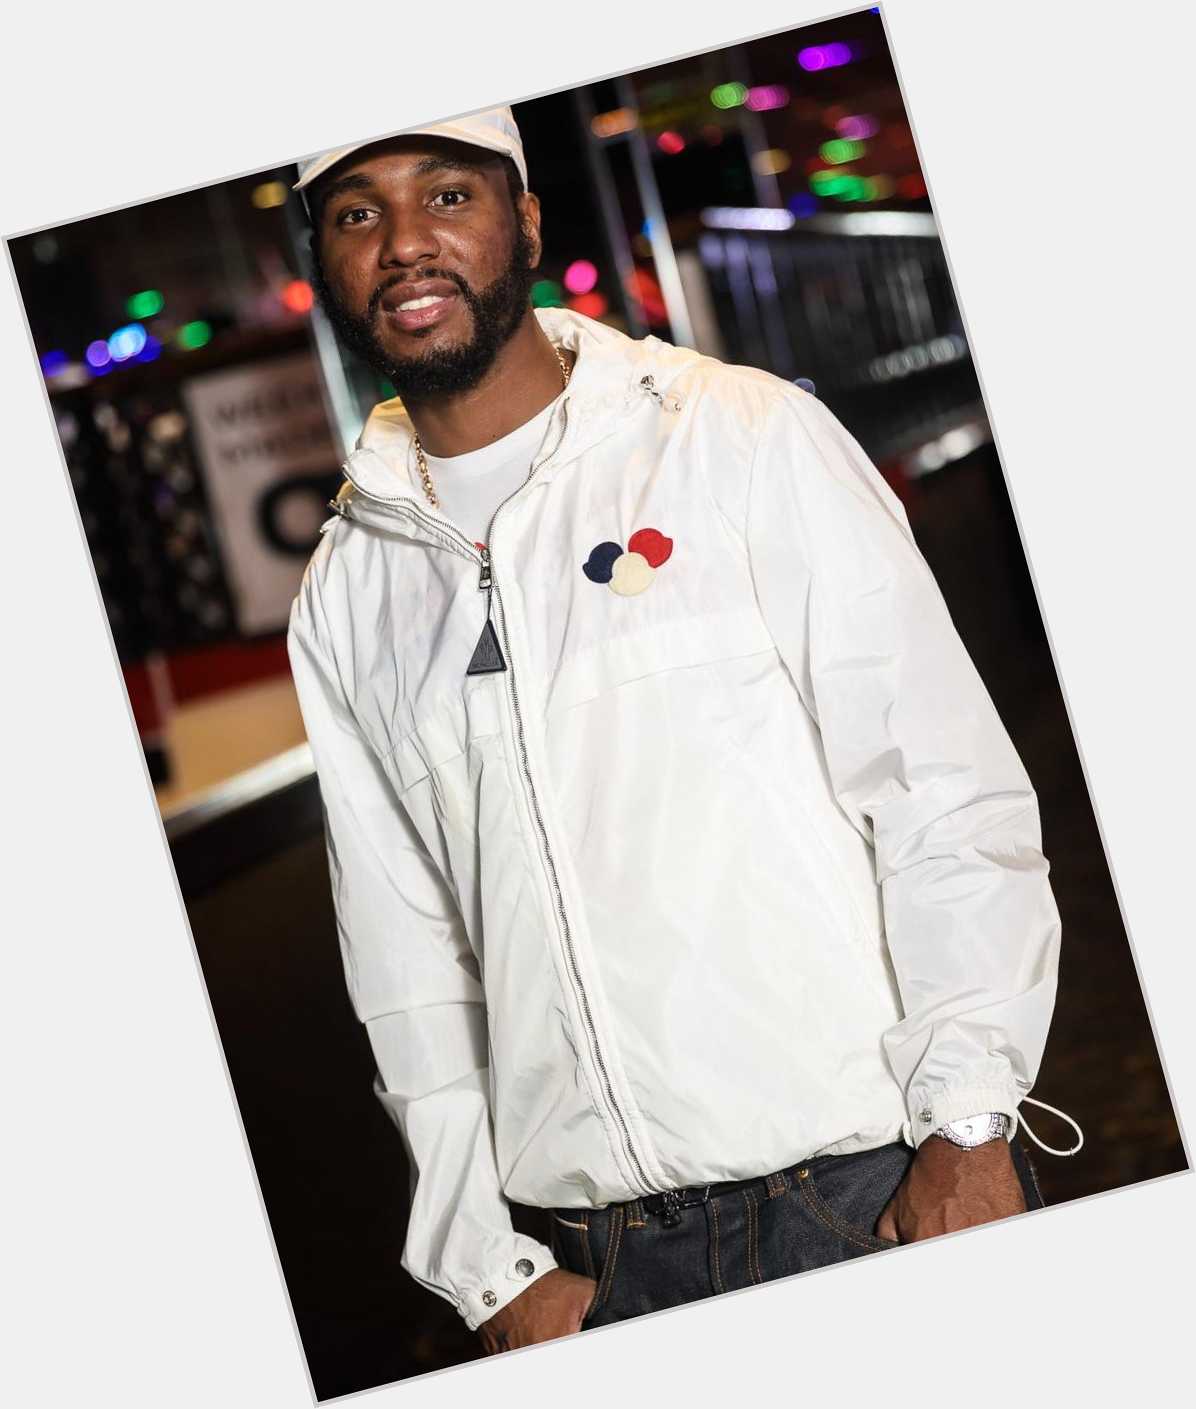 <a href="/hot-men/neef-buck/is-he-why-dissing-meek-mill-beefing-much">Neef Buck</a> Average body,  black hair & hairstyles